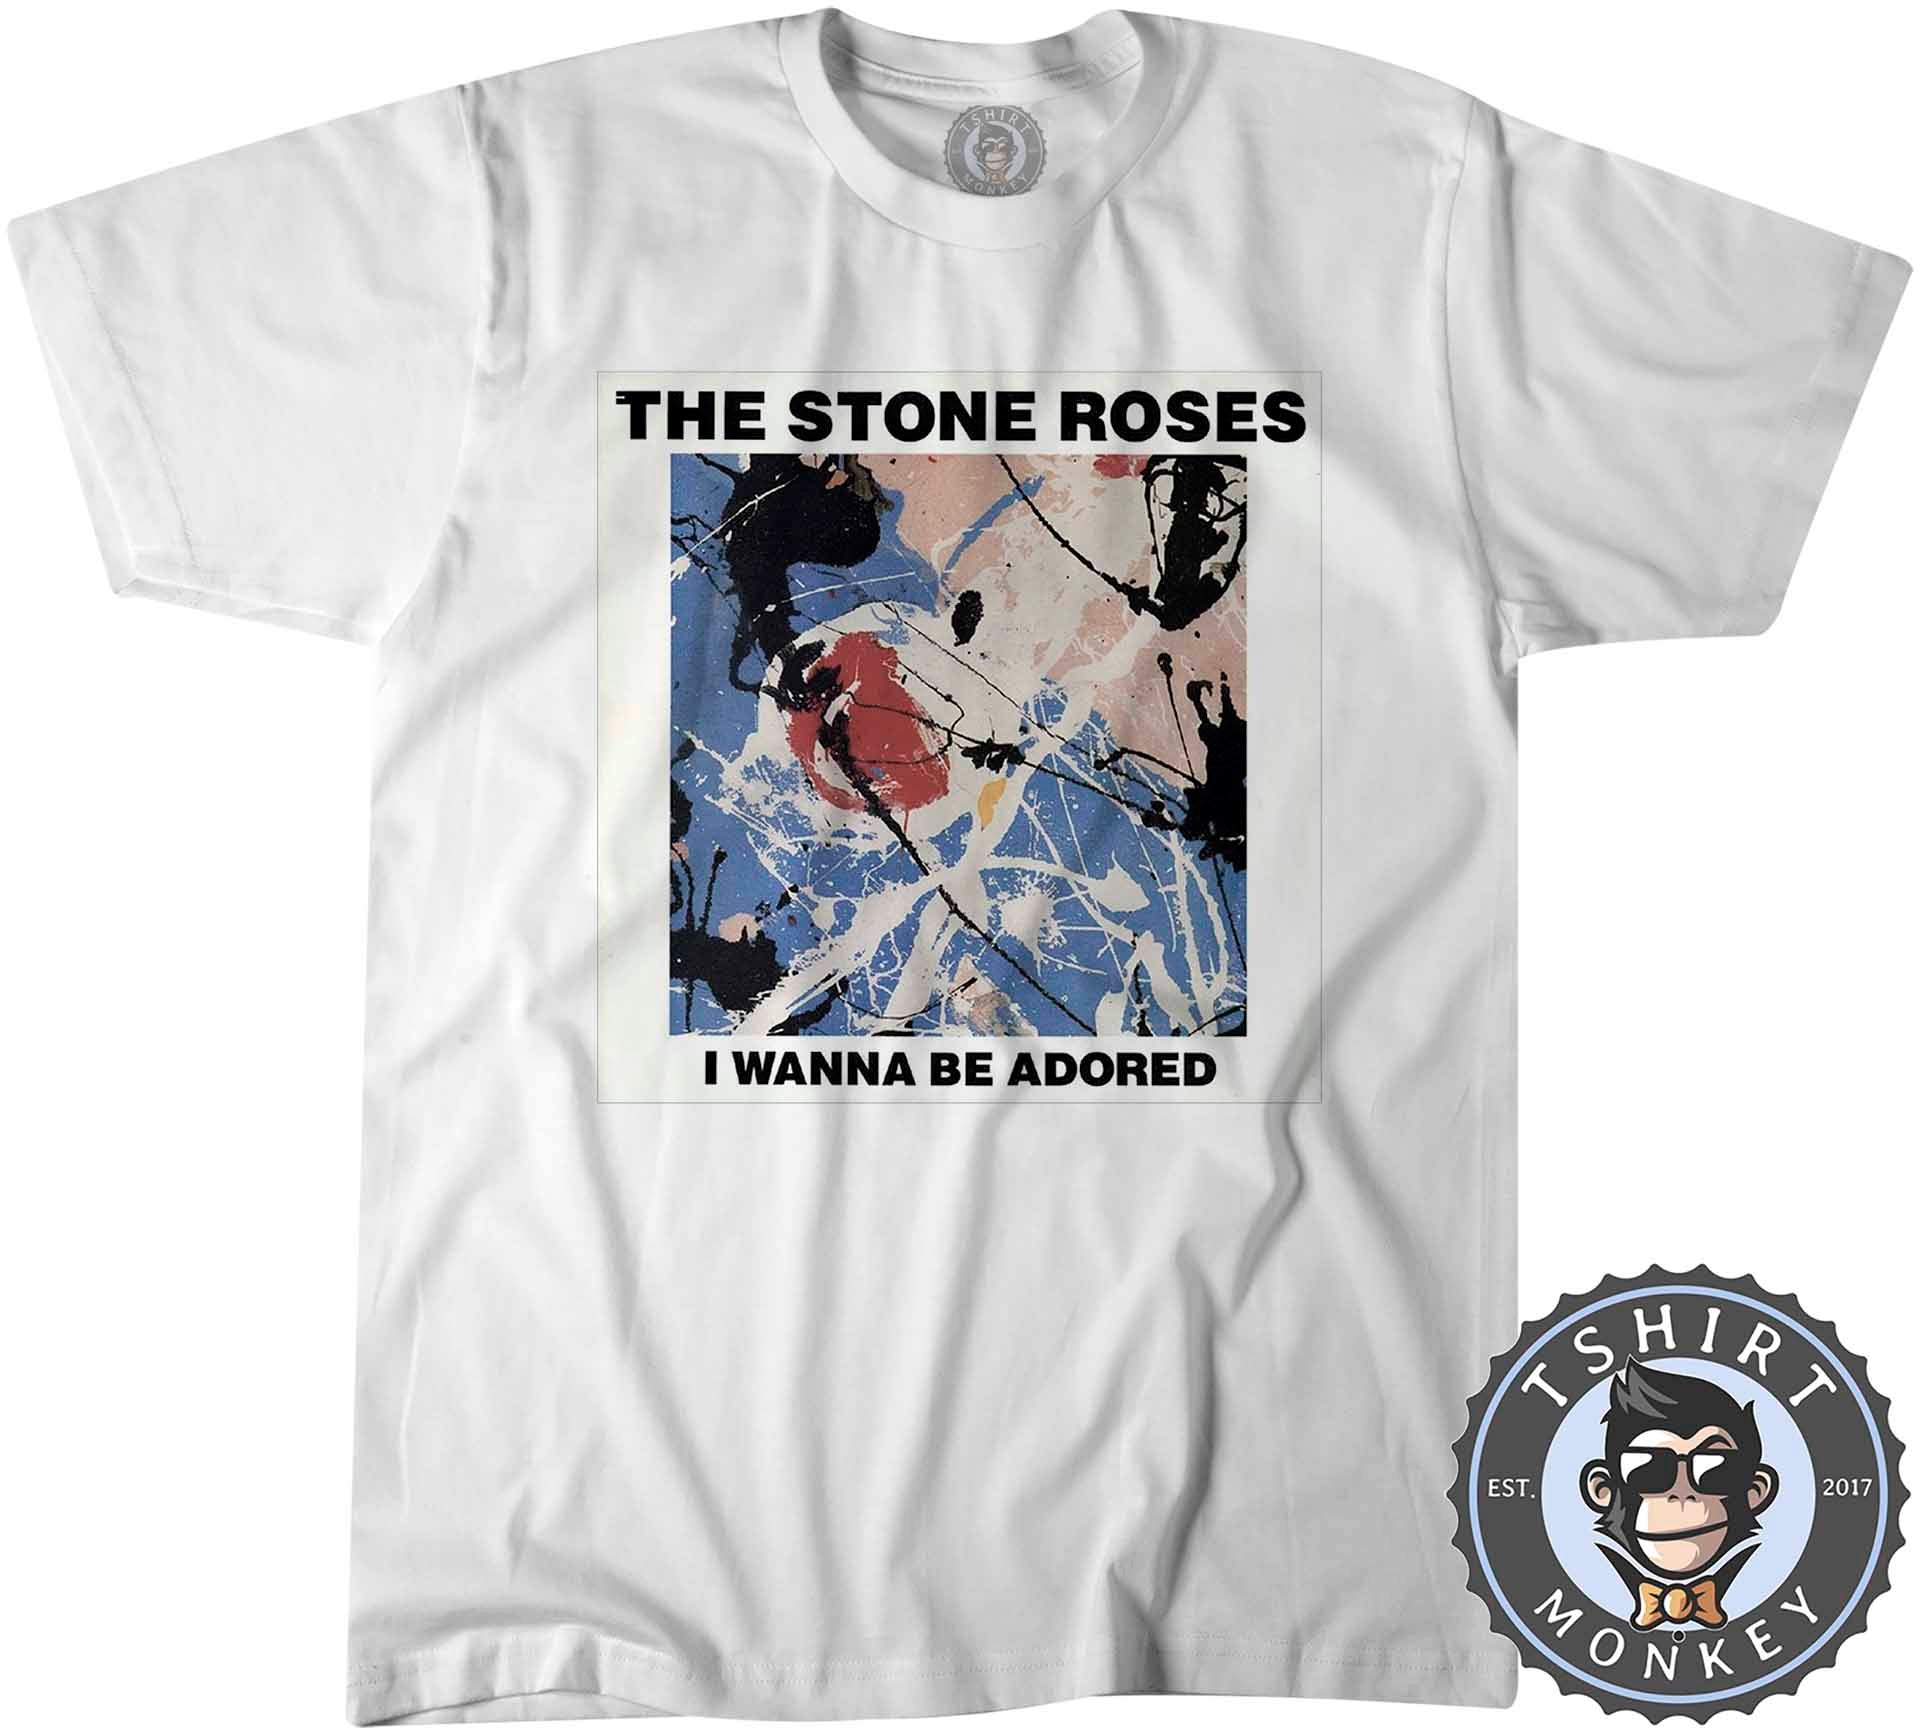 I Wanna Be Adored By The Stone Roses Tshirt Kids Youth Children 0172 Teetiger